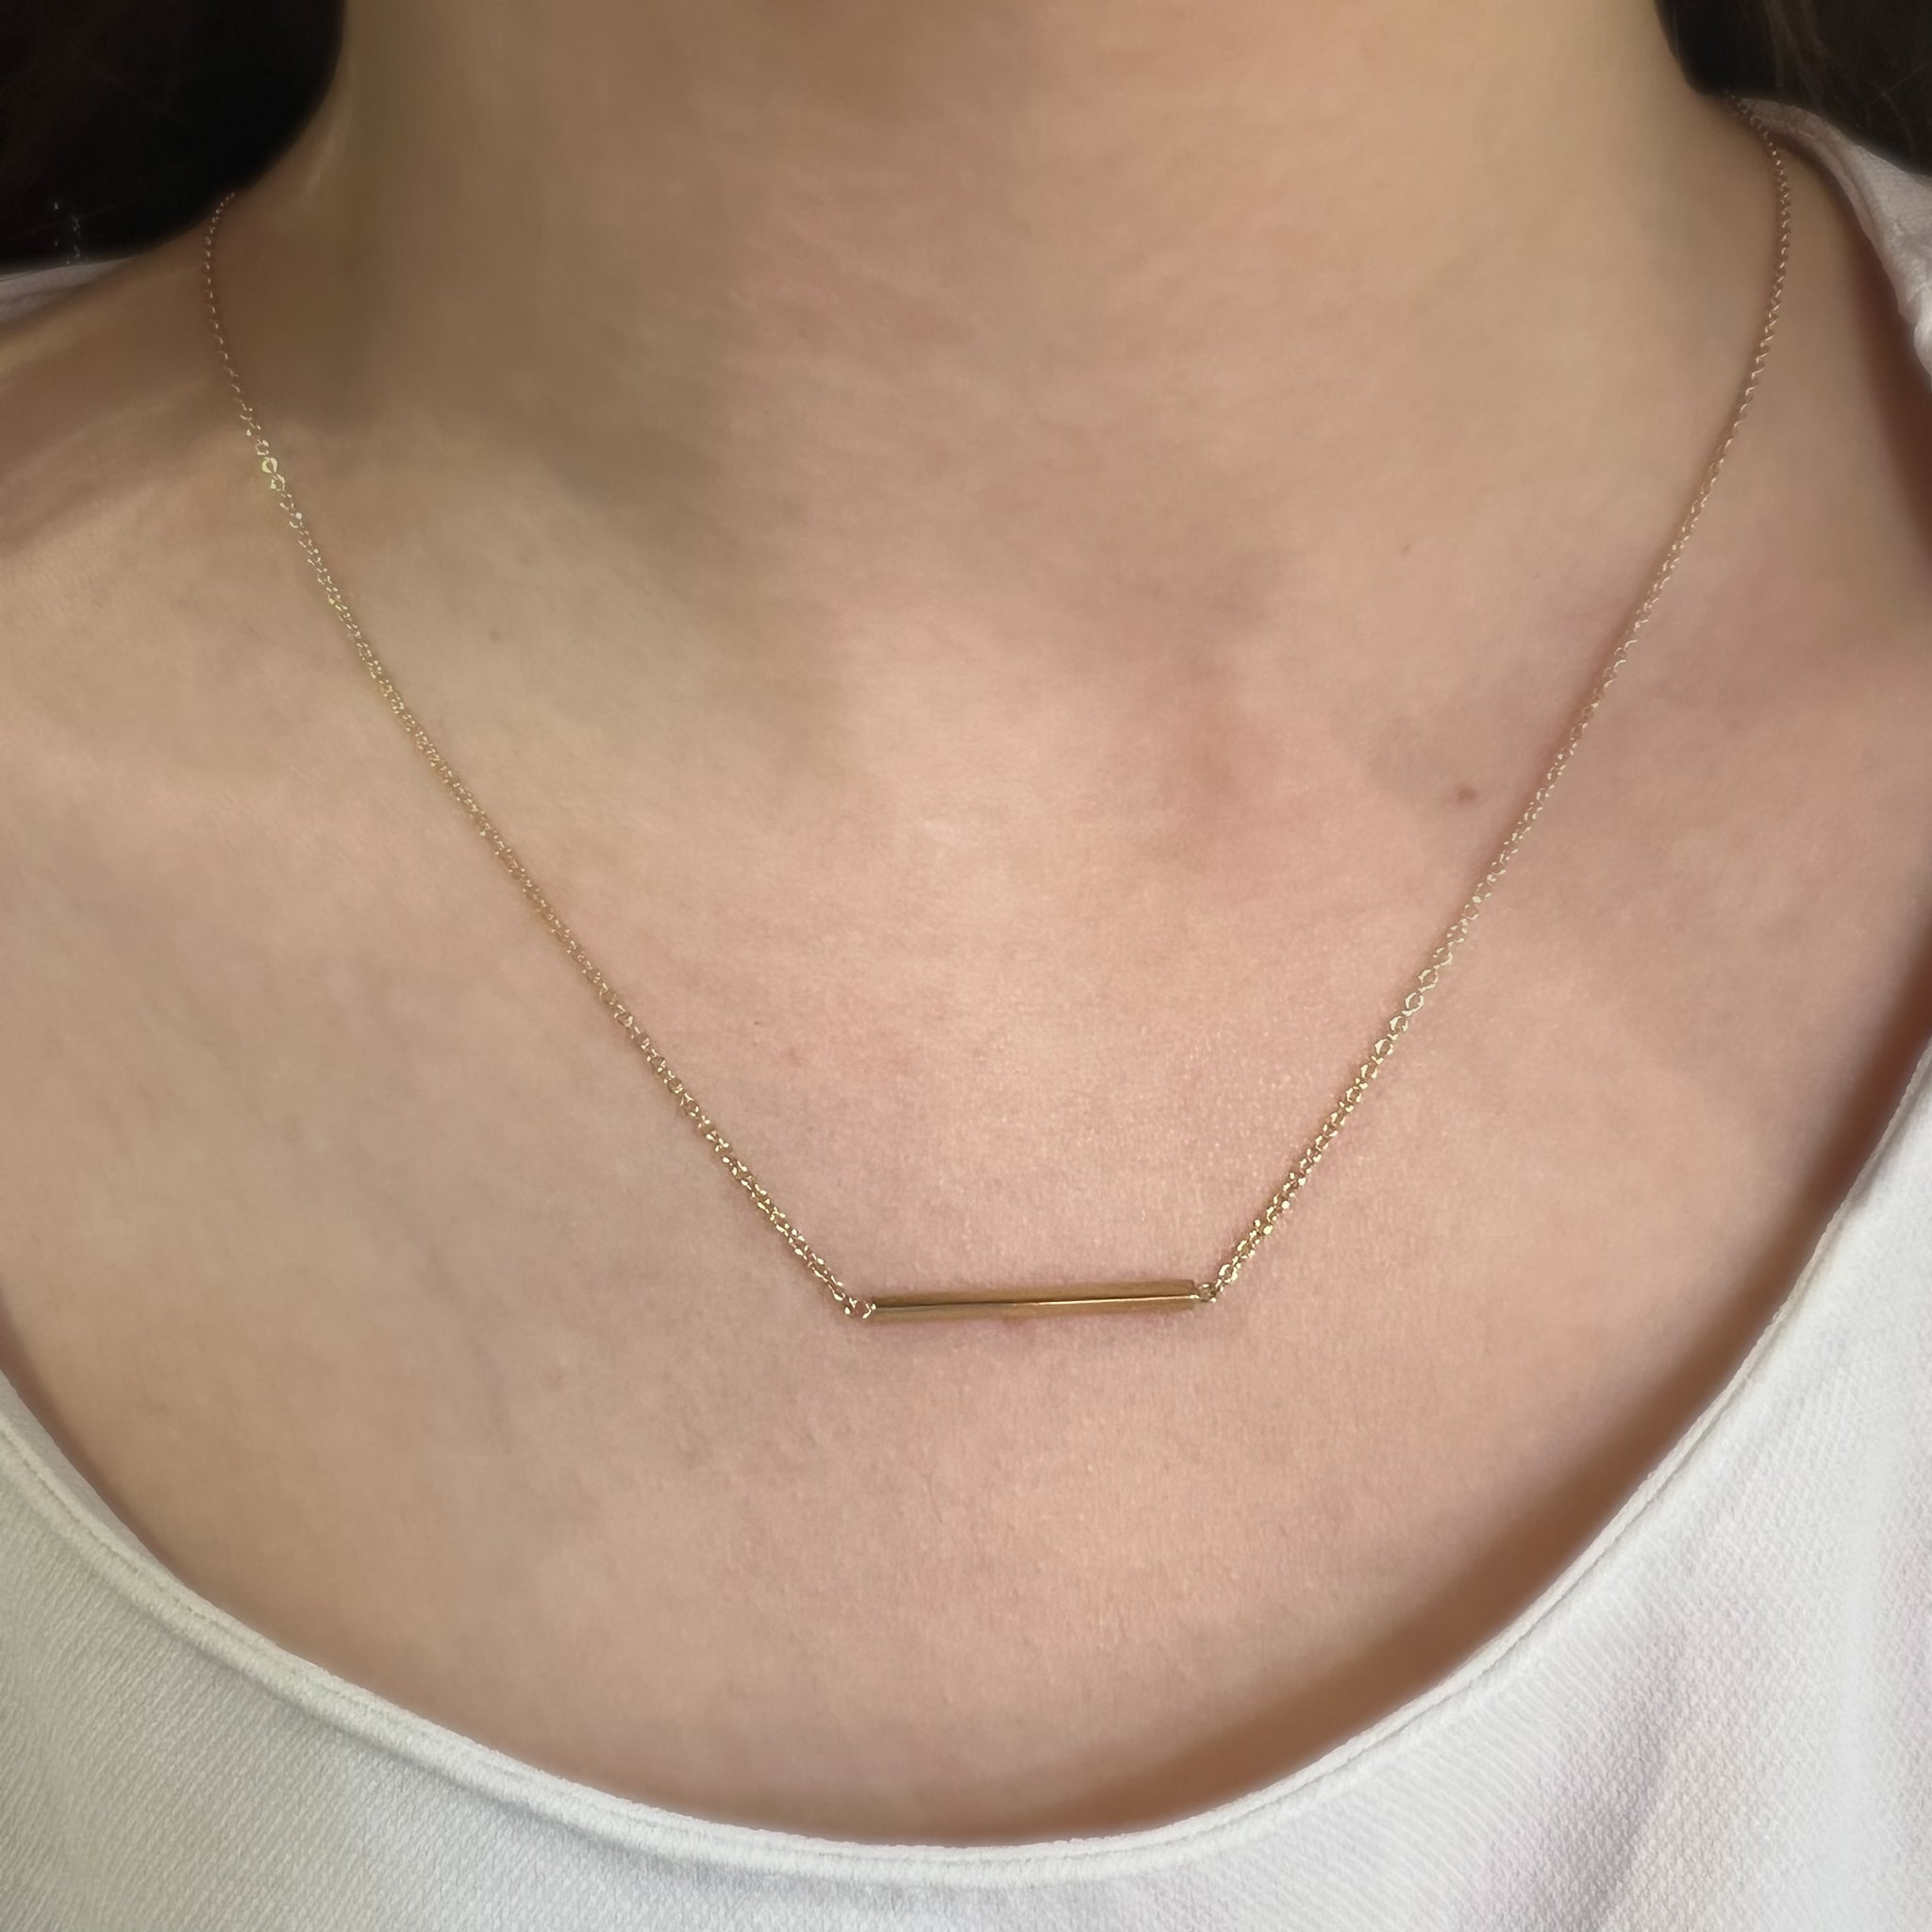 9ct Yellow Gold Square Bar Necklace